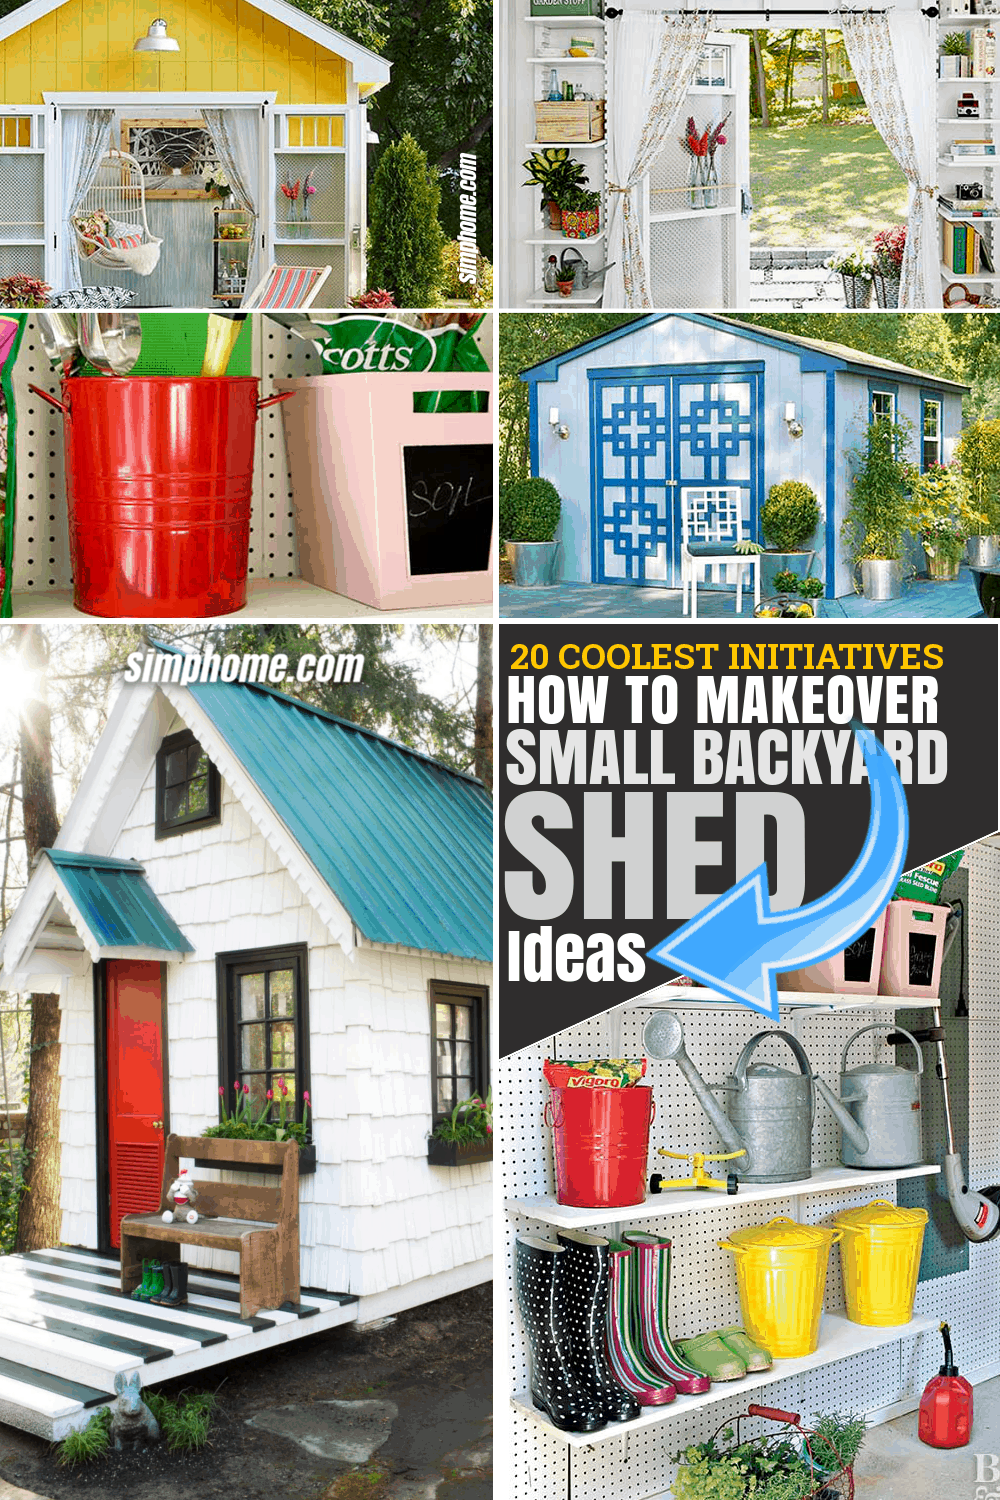 SIMPHOME.COM 10 How to Makeover Small Backyard Shed Ideas Featured Pinterest Image